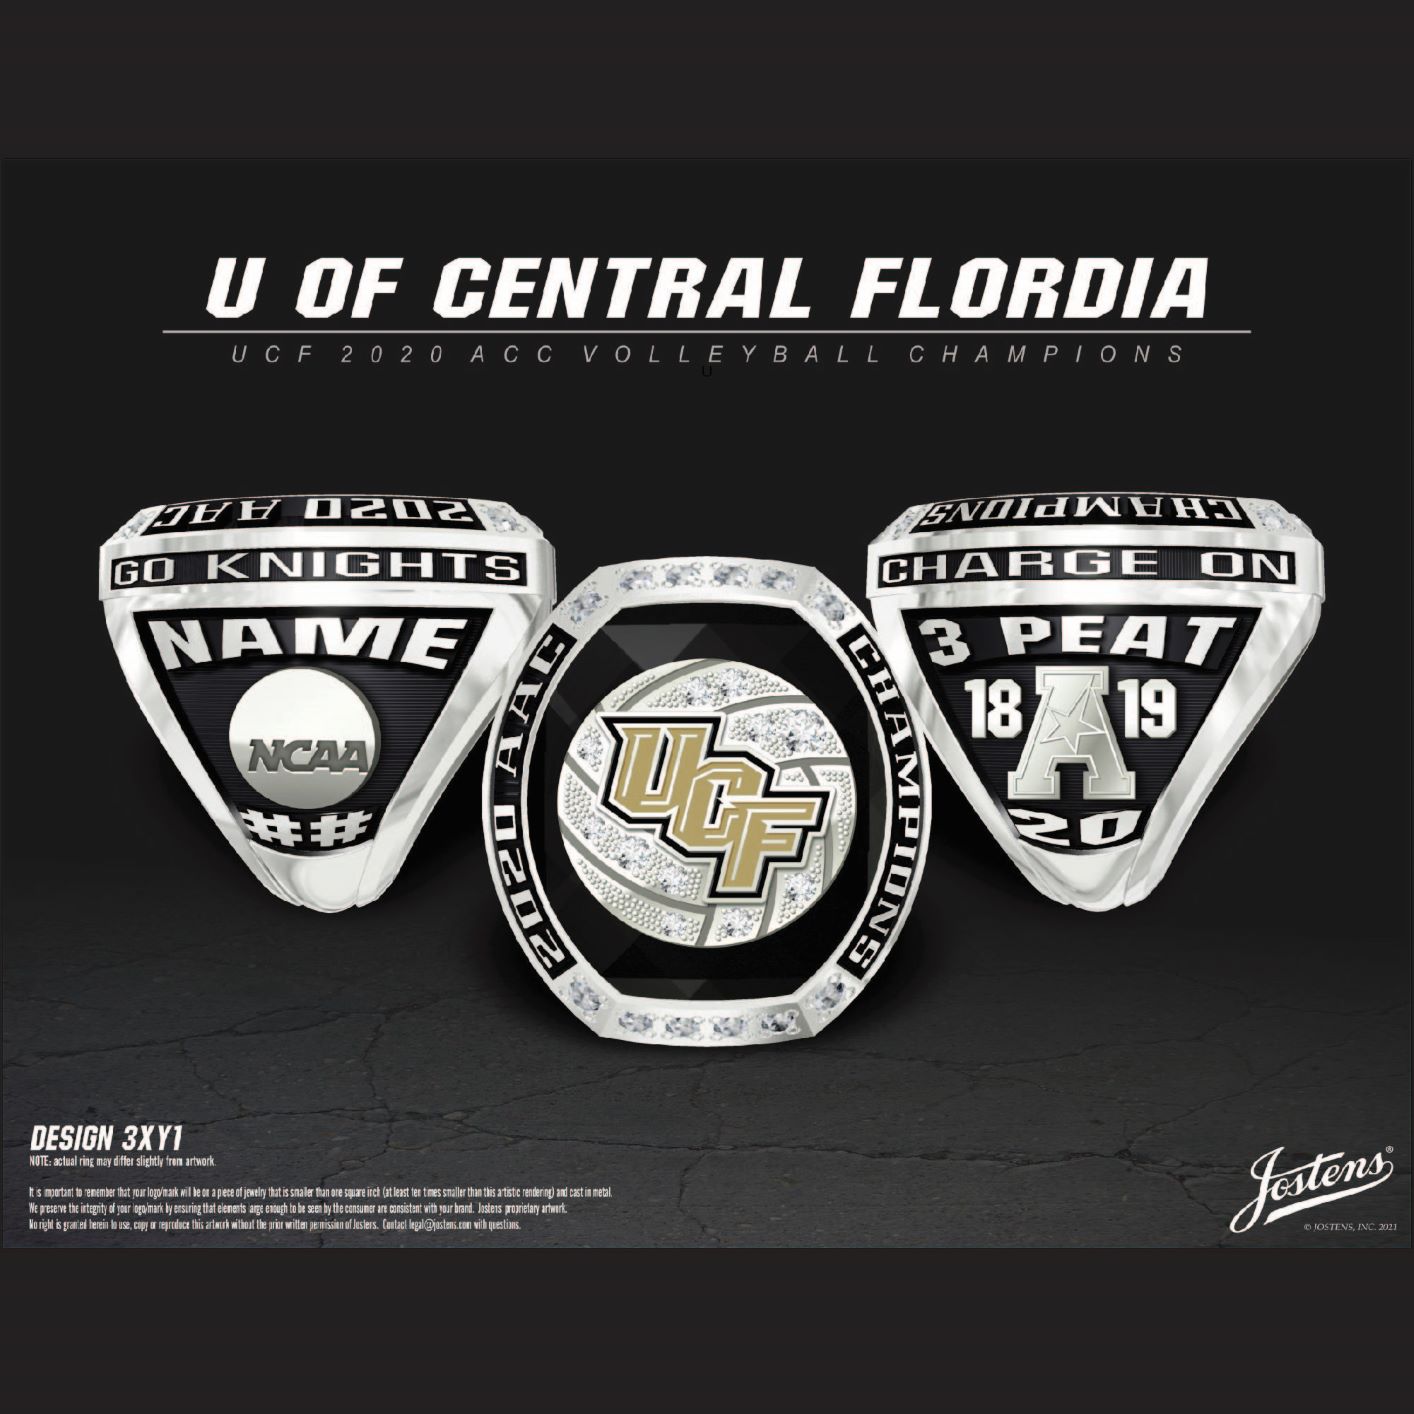 University of Central Florida Women's Volleyball 2020 ACC Championship Ring